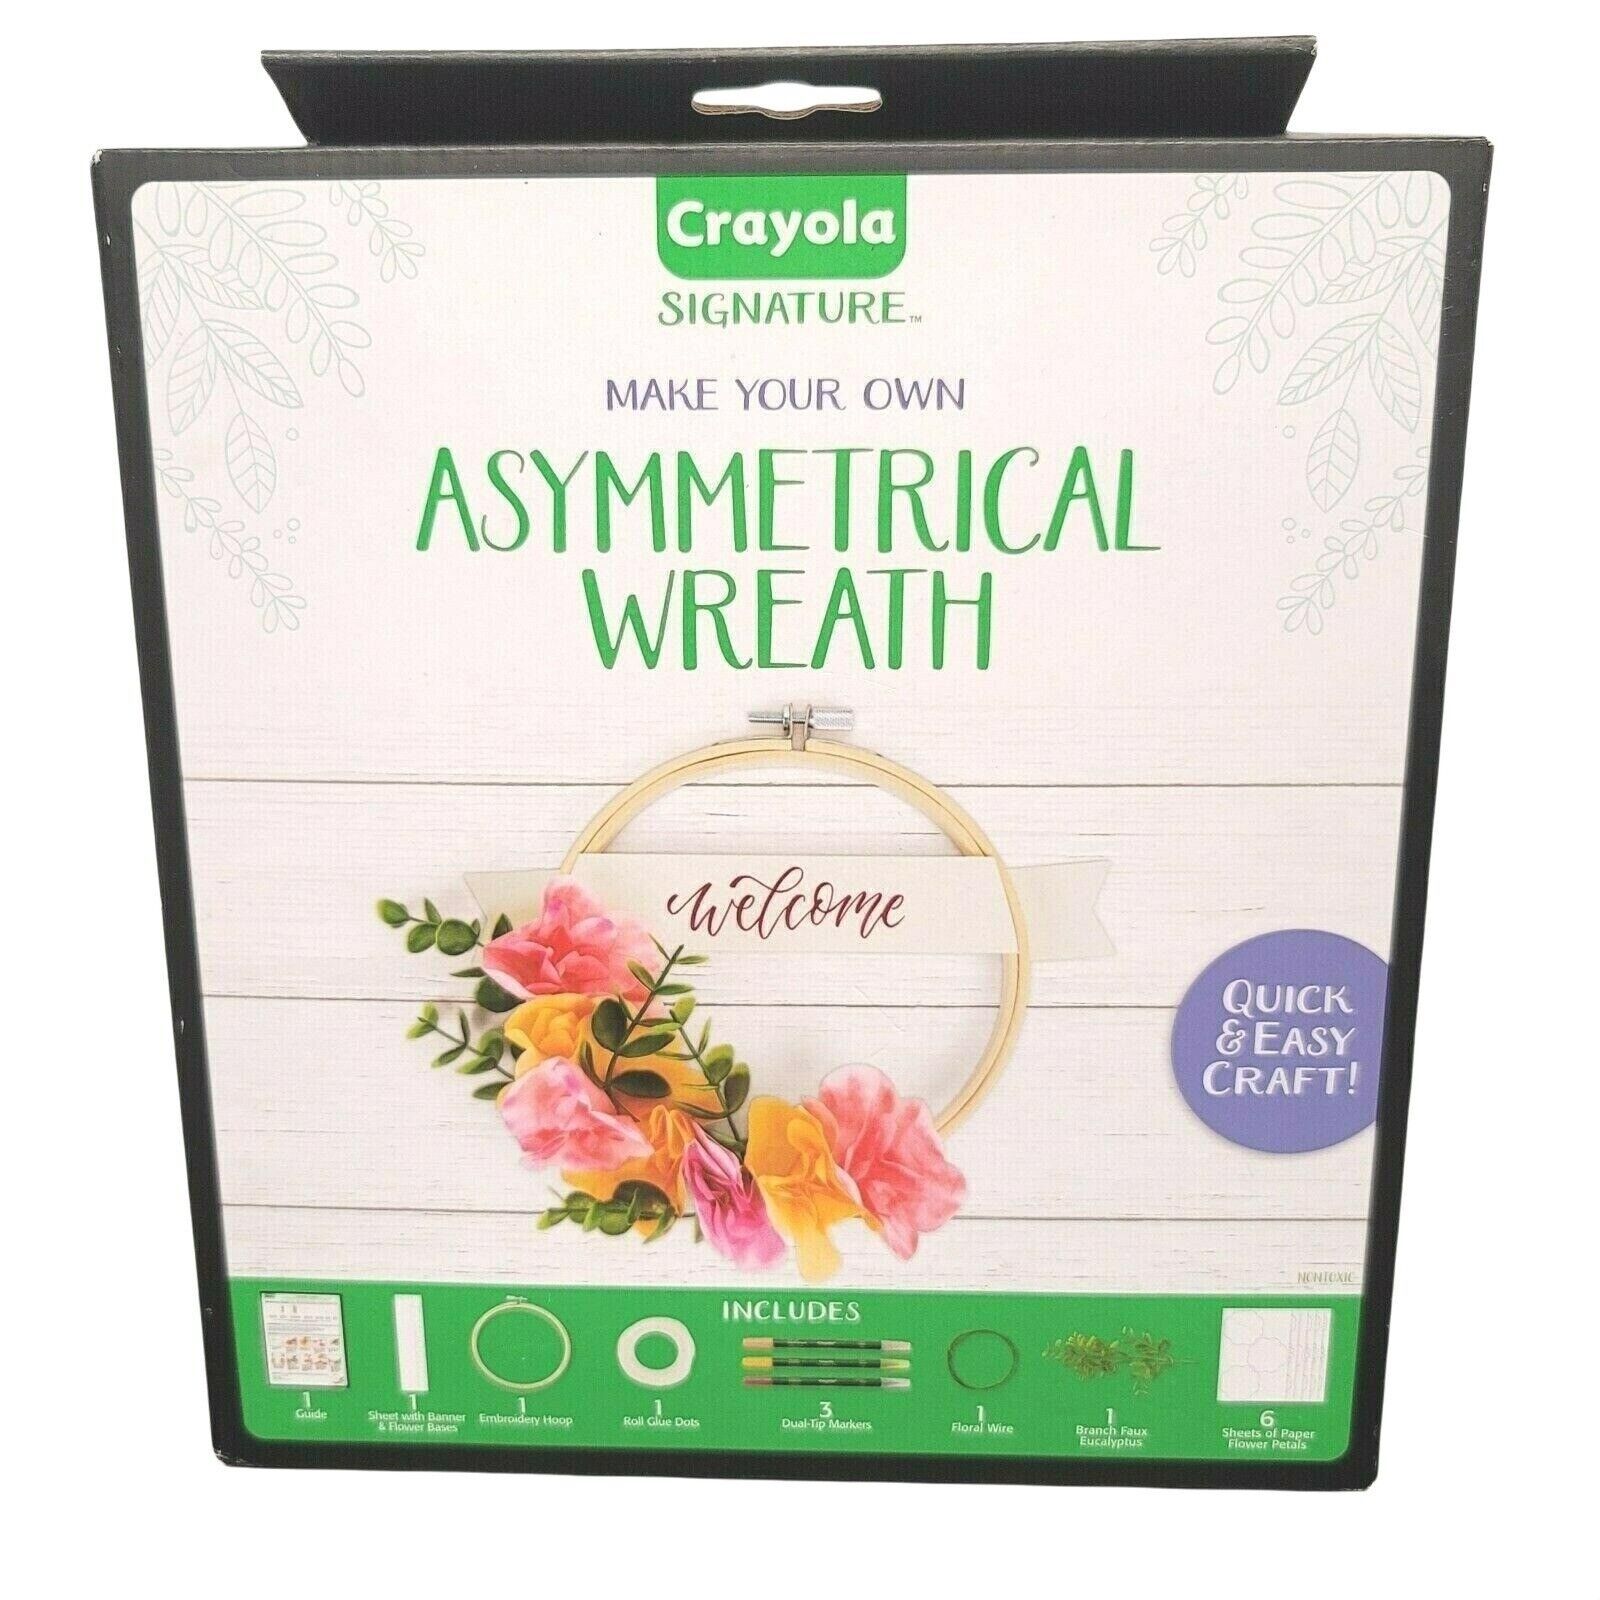 Primary image for Crayola Make Your Own Asymmetrical Wreath New Craft Kit Signature Room Decor